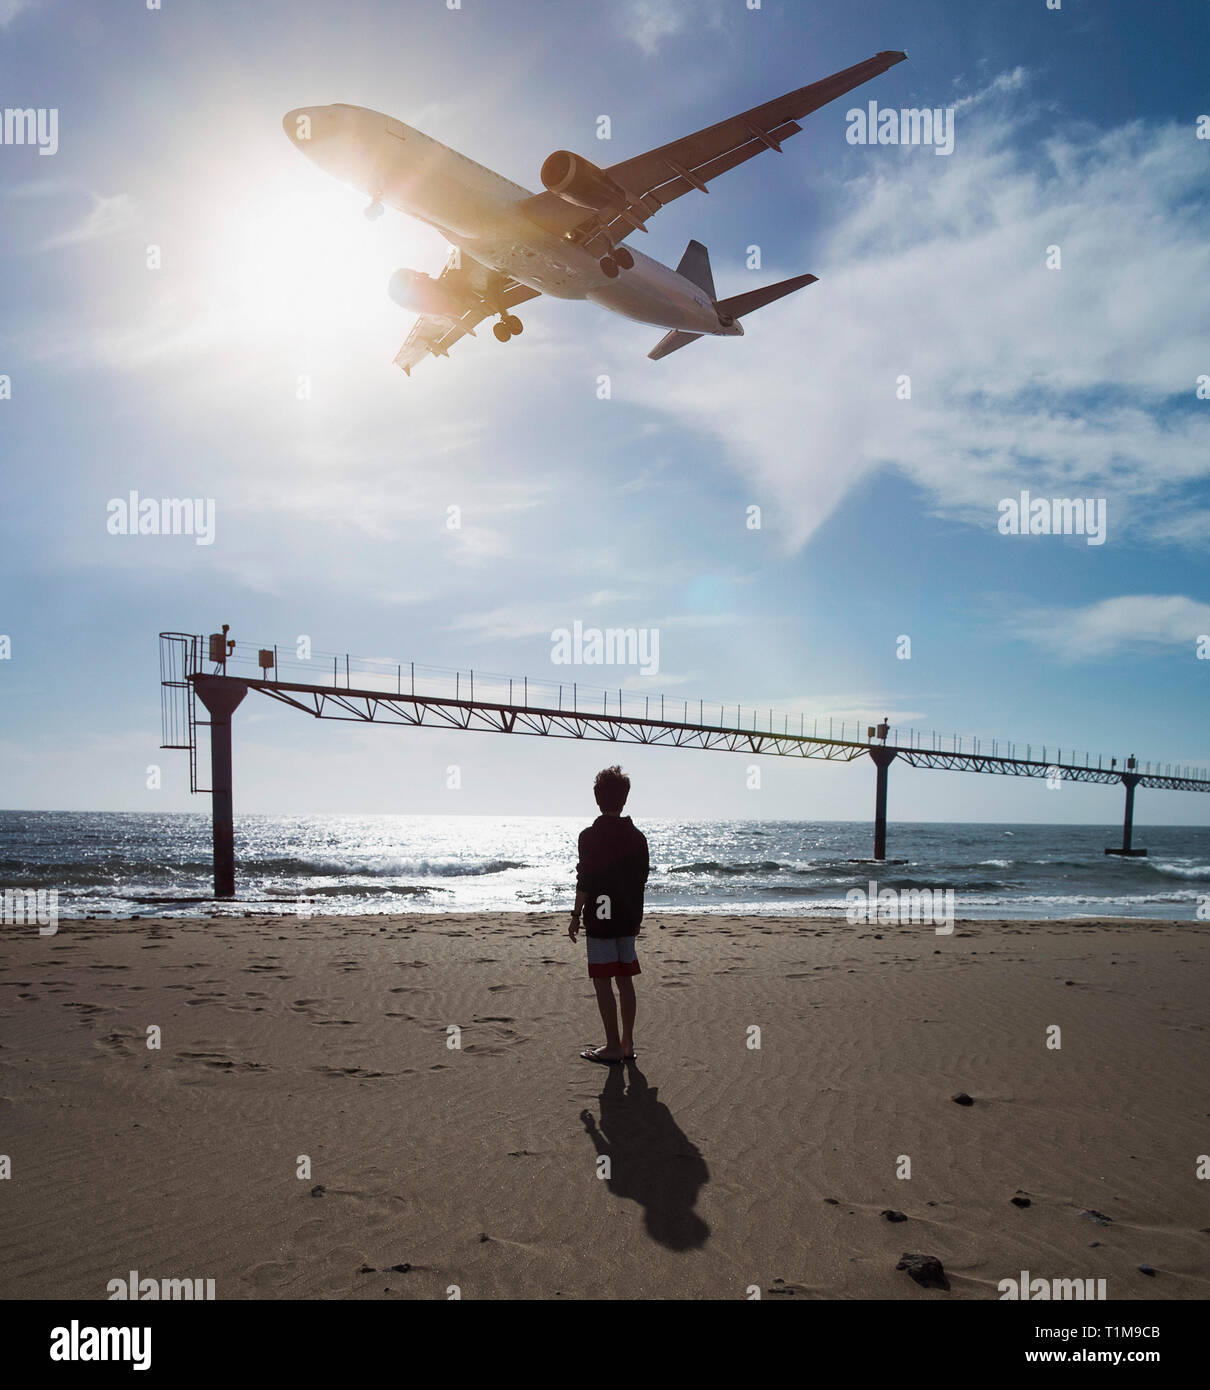 Boy looking up at airplane flying low over ocean near Lanzarote Airport, Puerto del Carmen, Spain Stock Photo